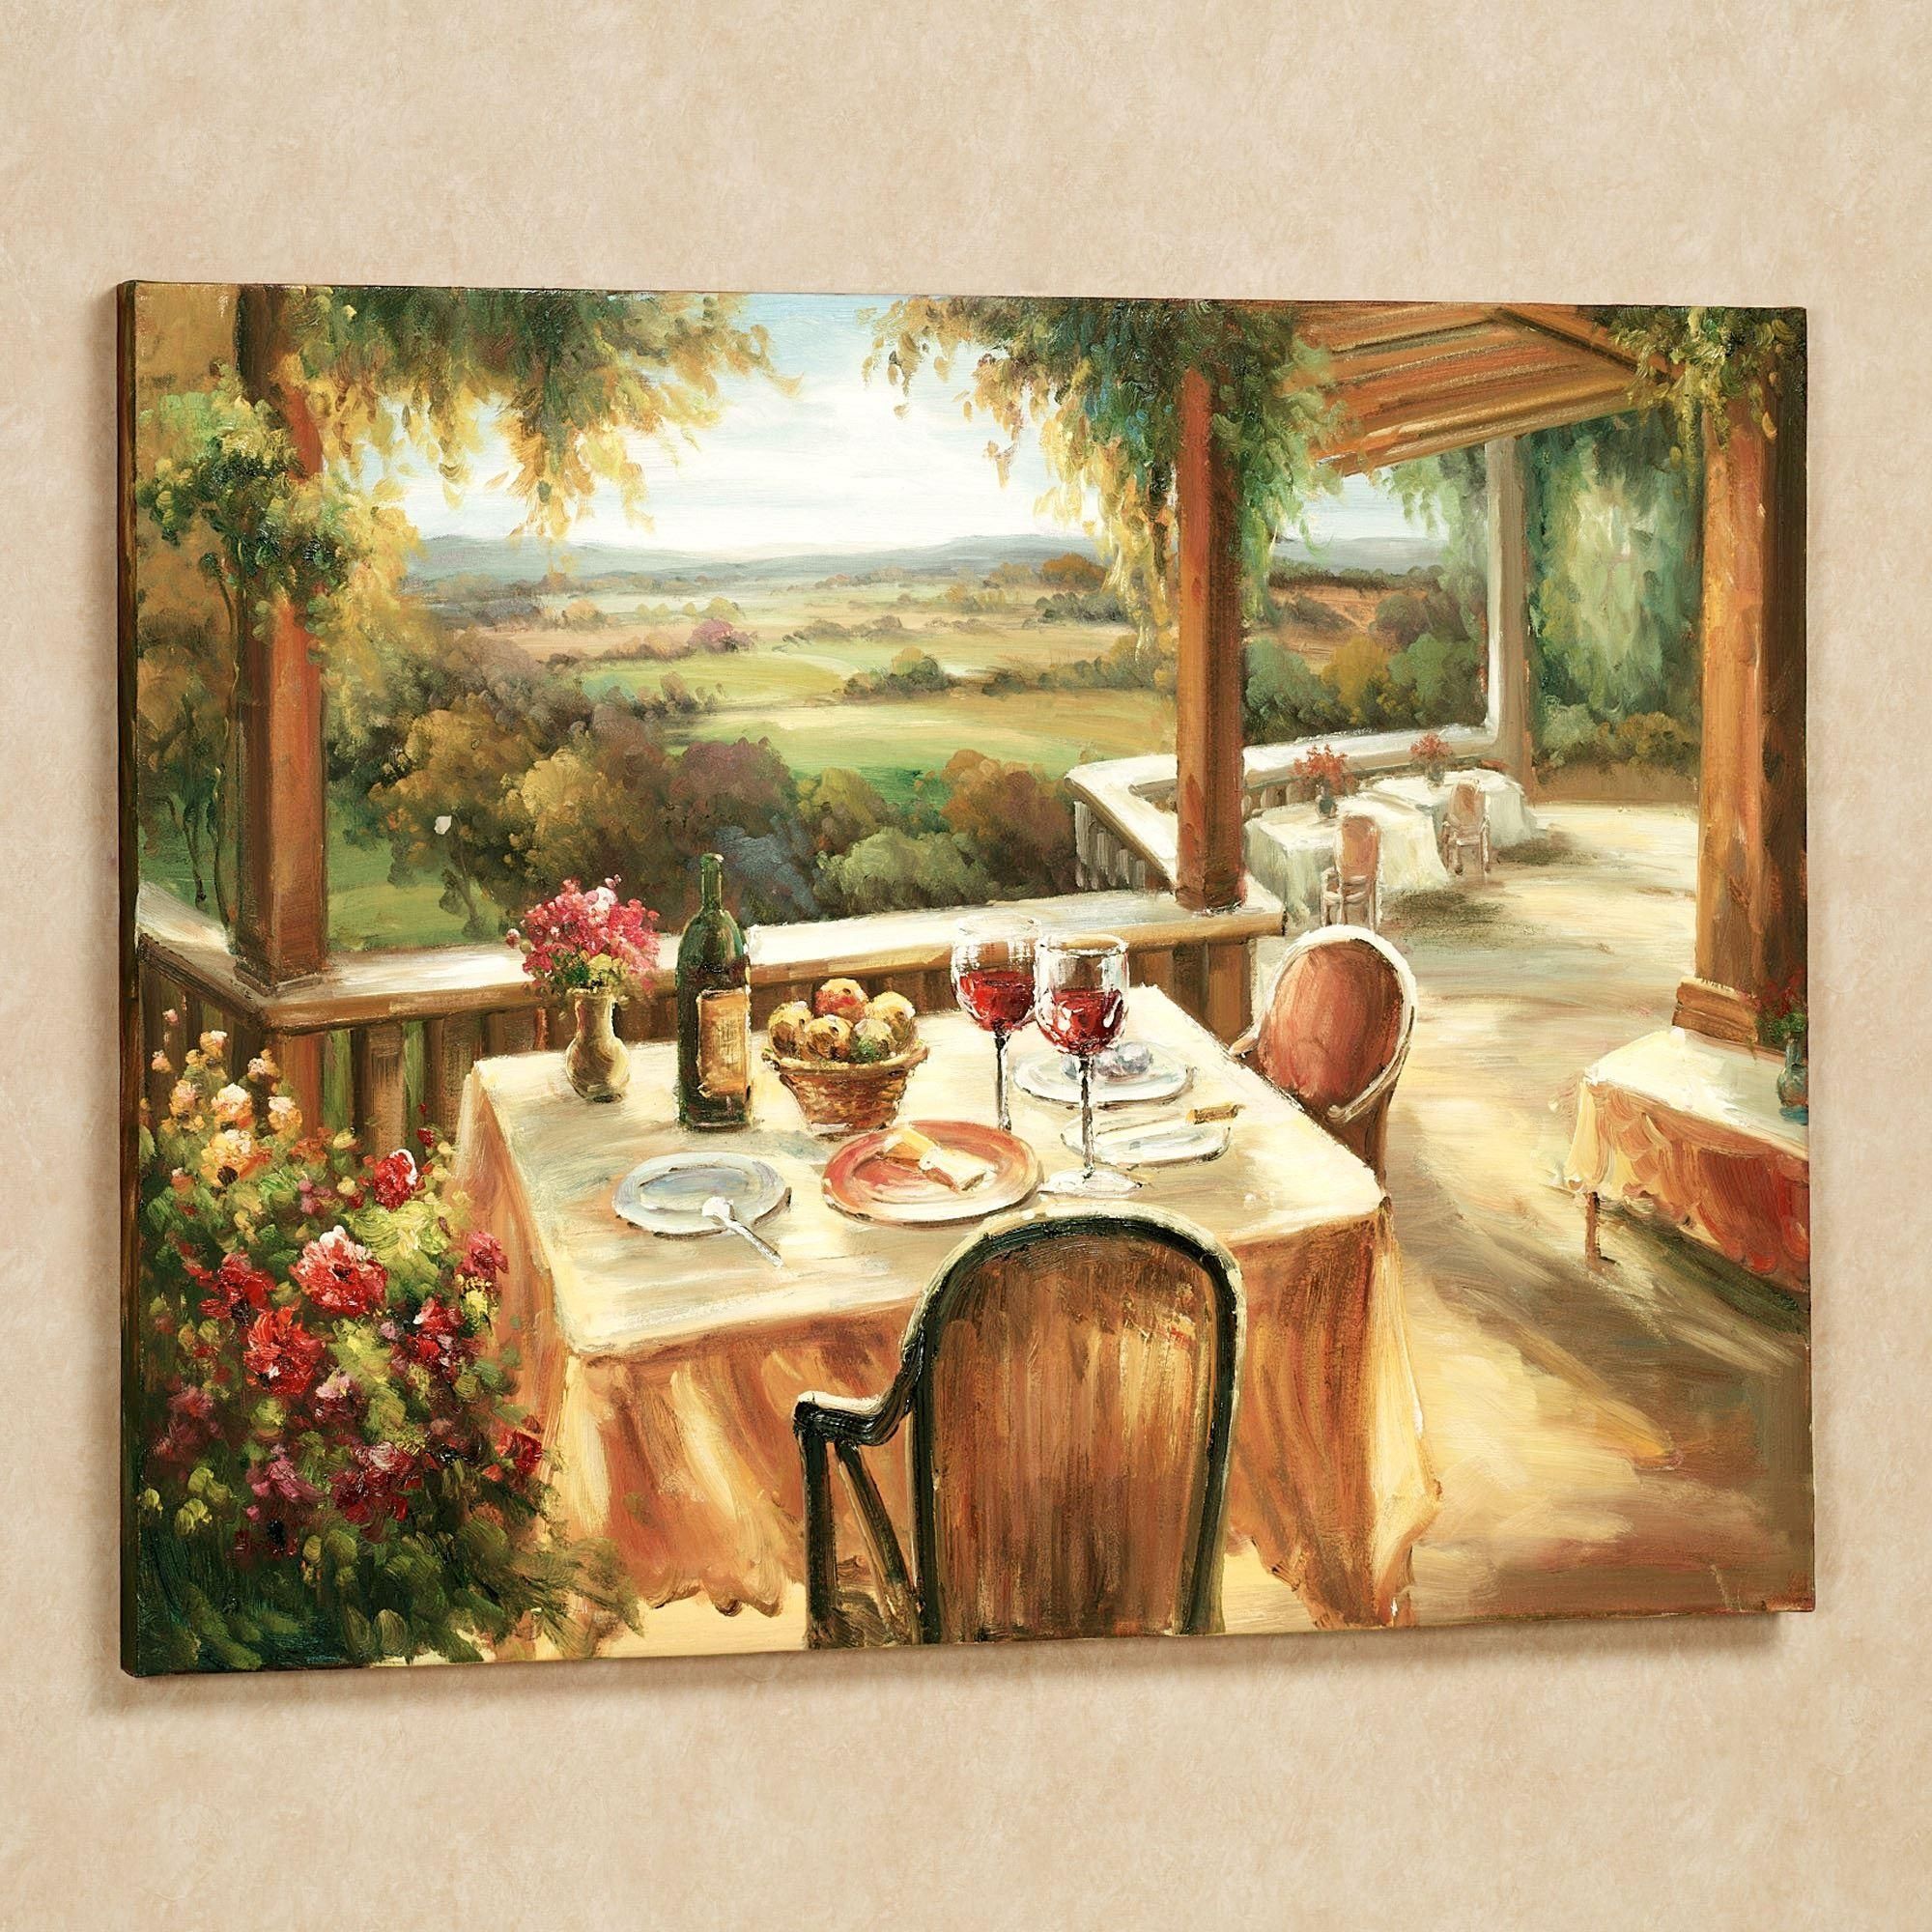 Home Decor Wall Art Tags : Awesome Kitchen Artwork Design Wrought With Rustic Italian Wall Art (View 14 of 20)